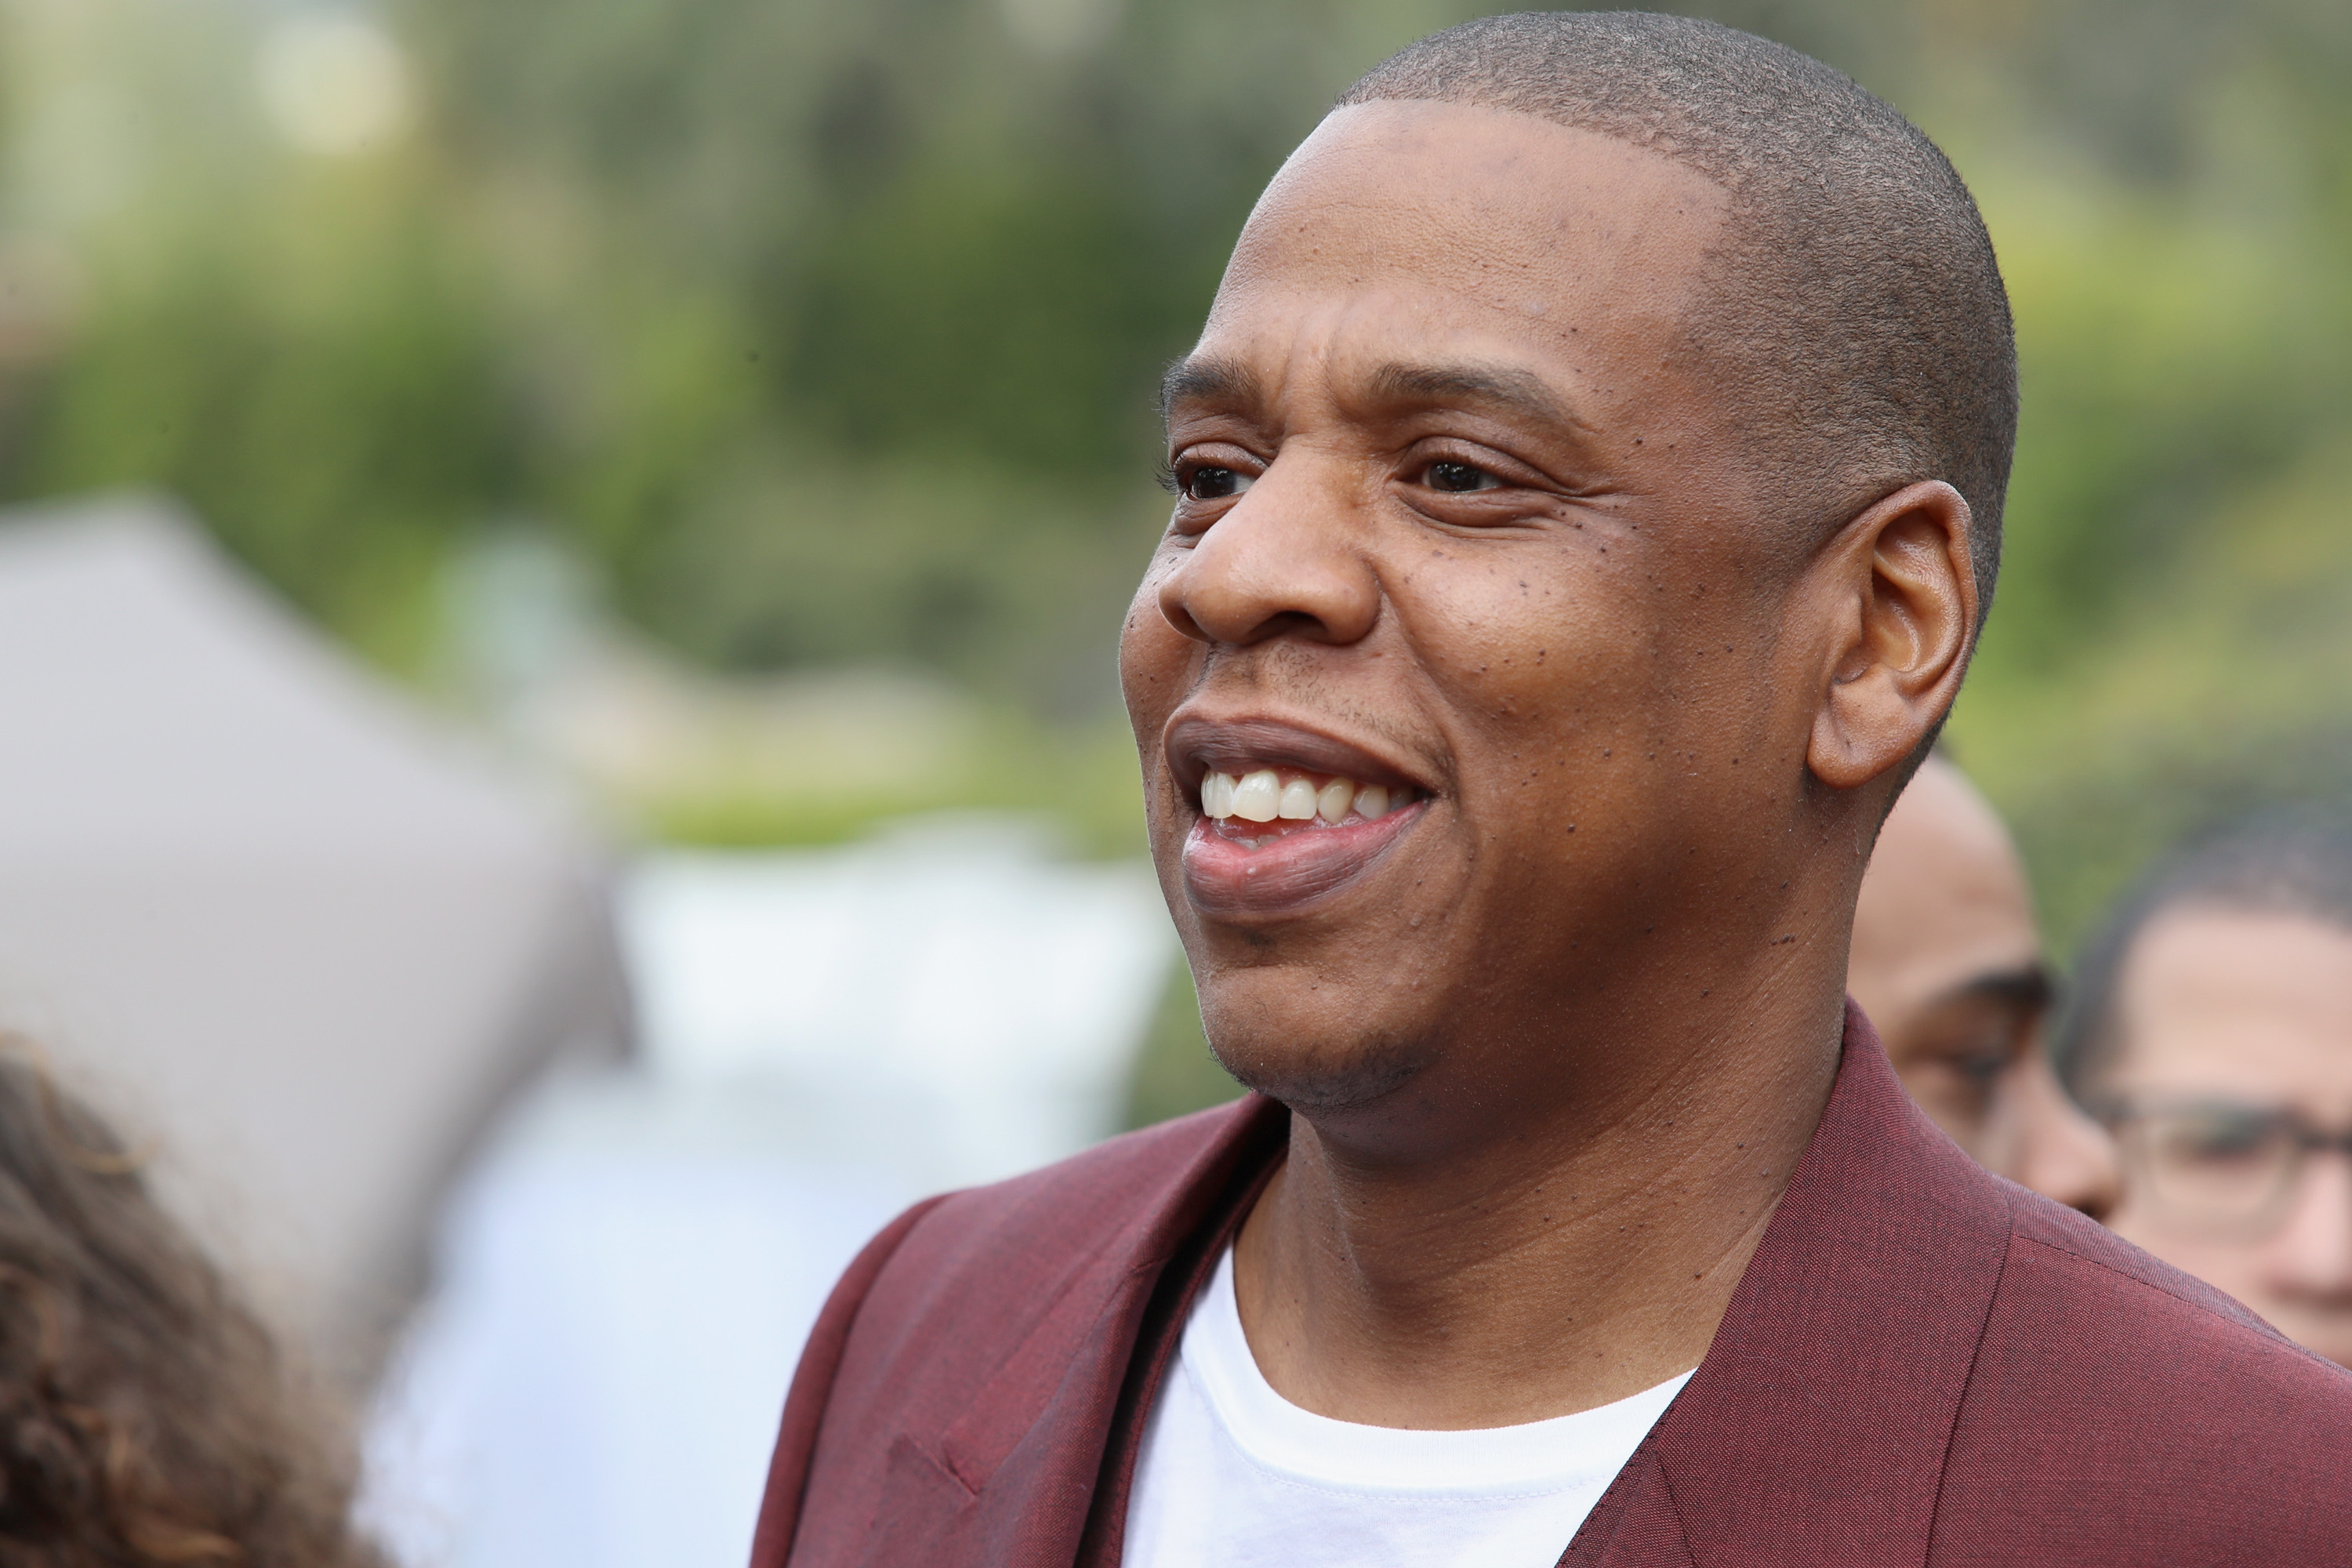 LOS ANGELES, CA - FEBRUARY 11:  Jay-Z attends 2017 Roc Nation Pre-Grammy Brunch at Owlwood Estate on February 11, 2017 in Los Angeles, California.  (Photo by Ari Perilstein/Getty Images for Roc Nation)